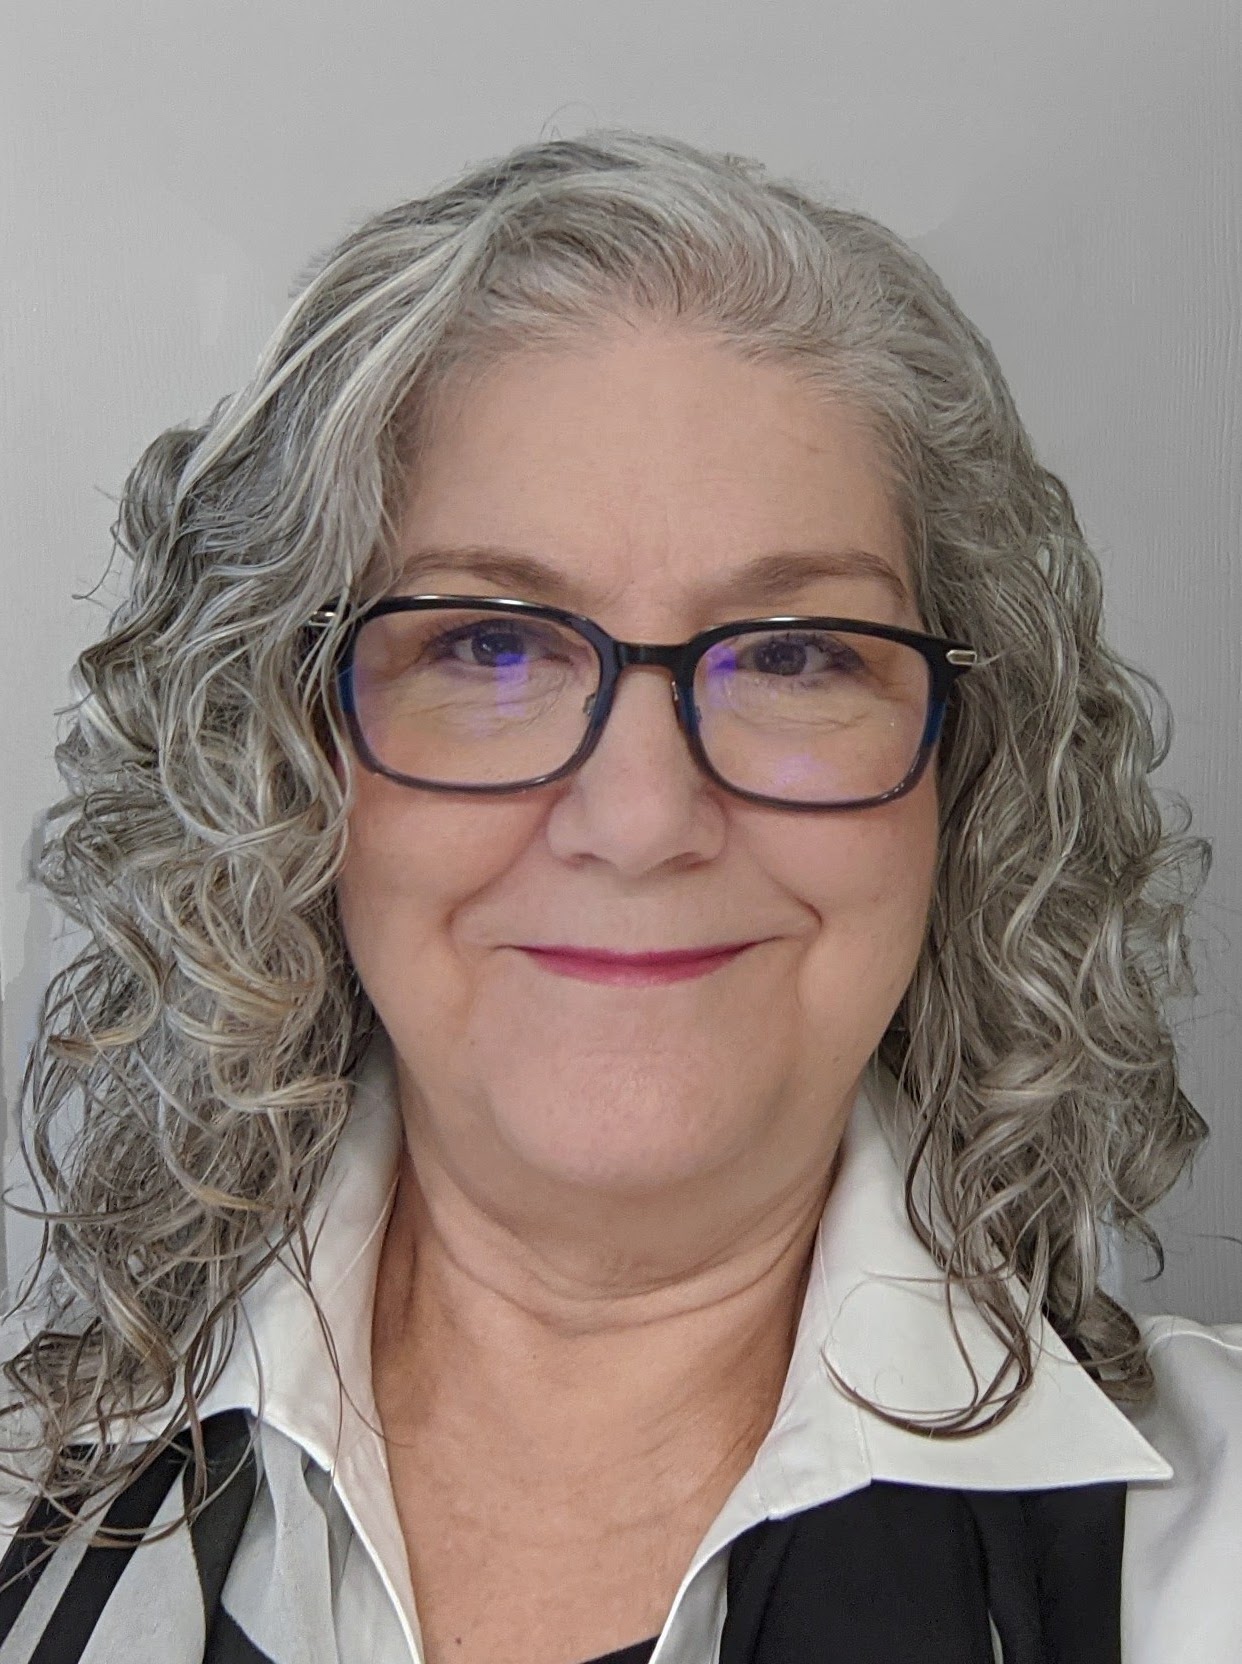 Dr. Celeste Conlon is the founder of Conlon Psychological Services. She is licensed in Texas as a psychologist and as a school psychologist (LSSP).